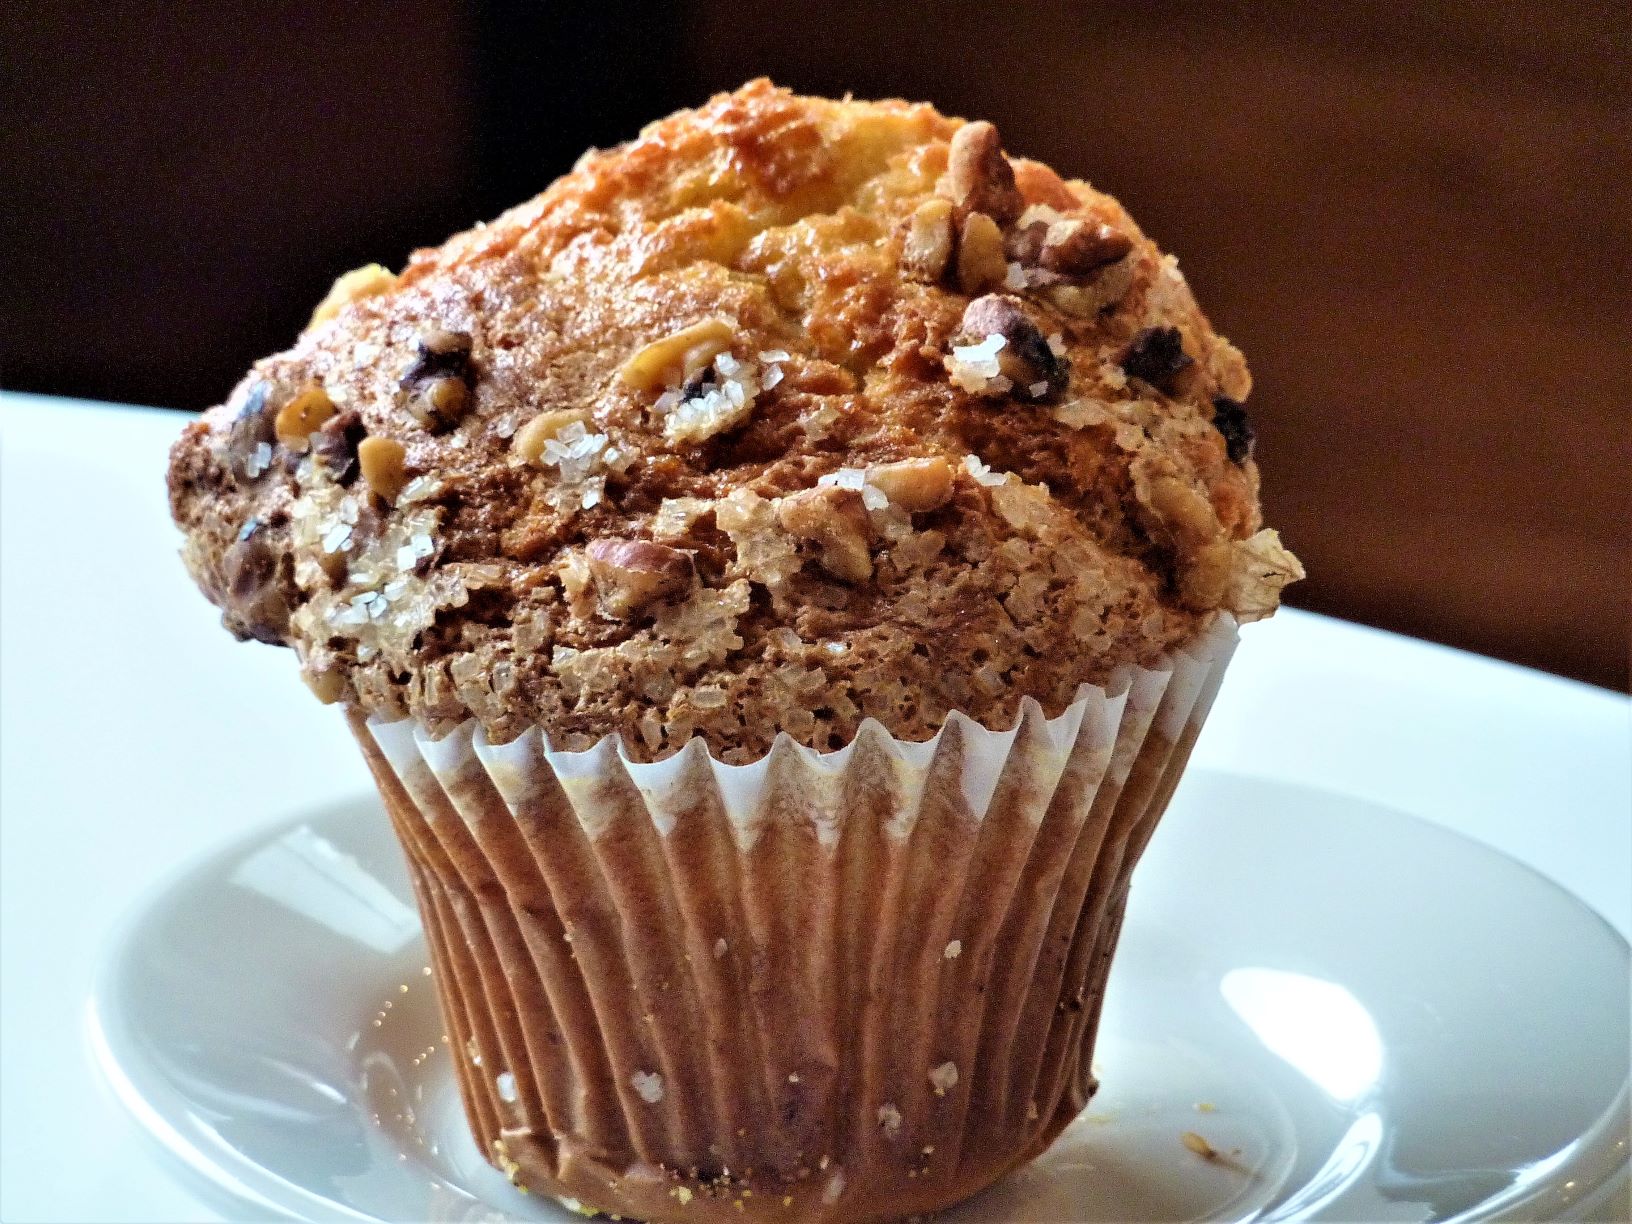 Banana nut muffin from Millis Clicquot Coffee in Millis, , Mass.